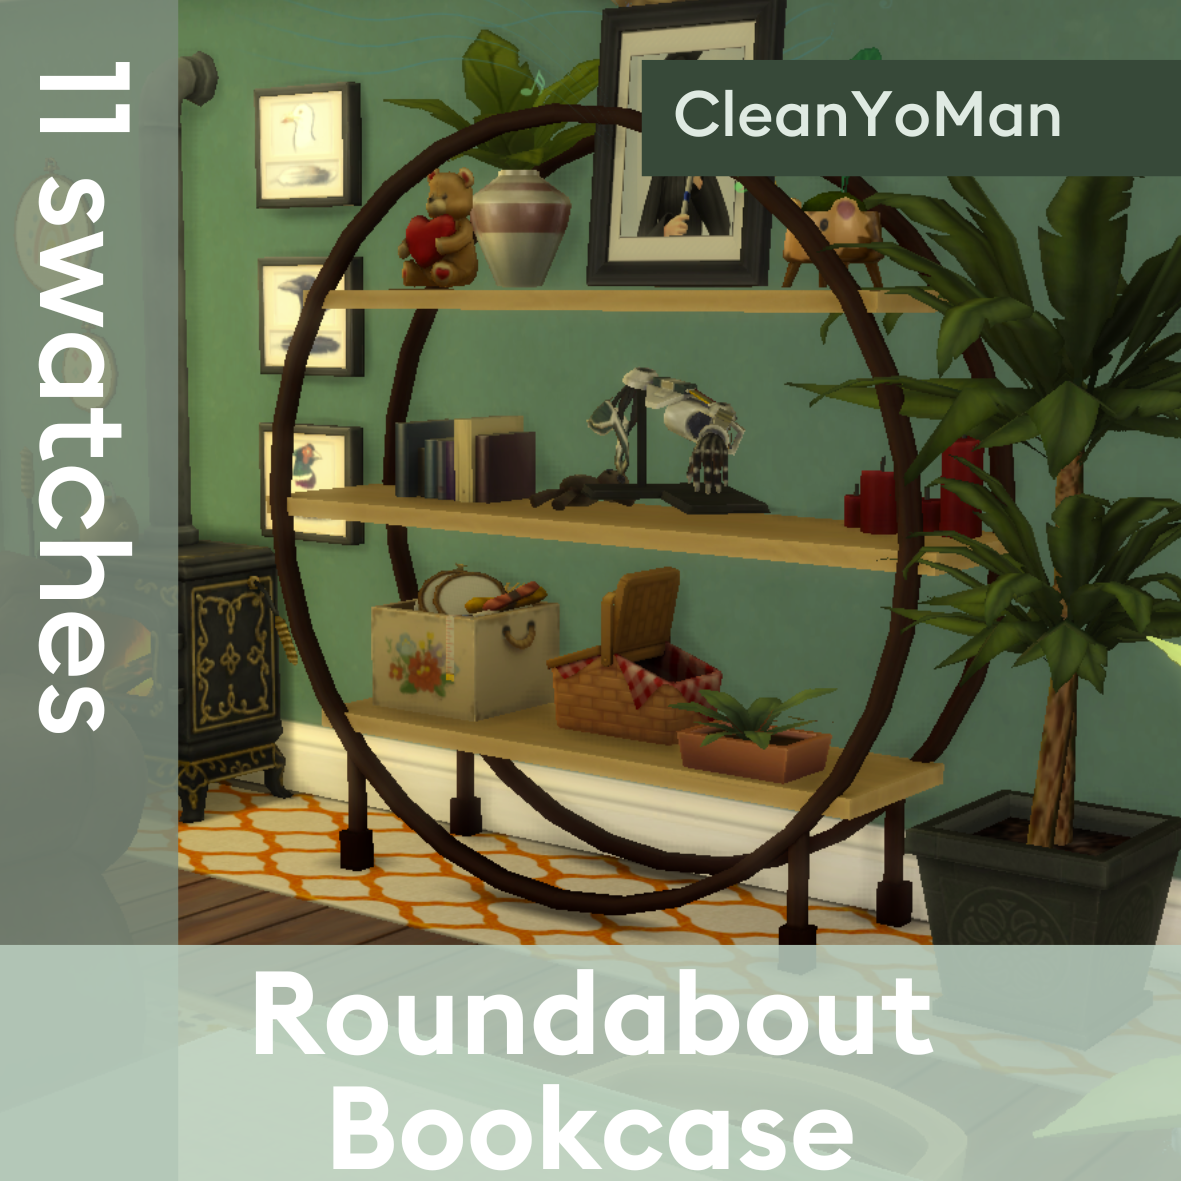 Roundabout Bookcase - The Sims 4 Build / Buy - CurseForge